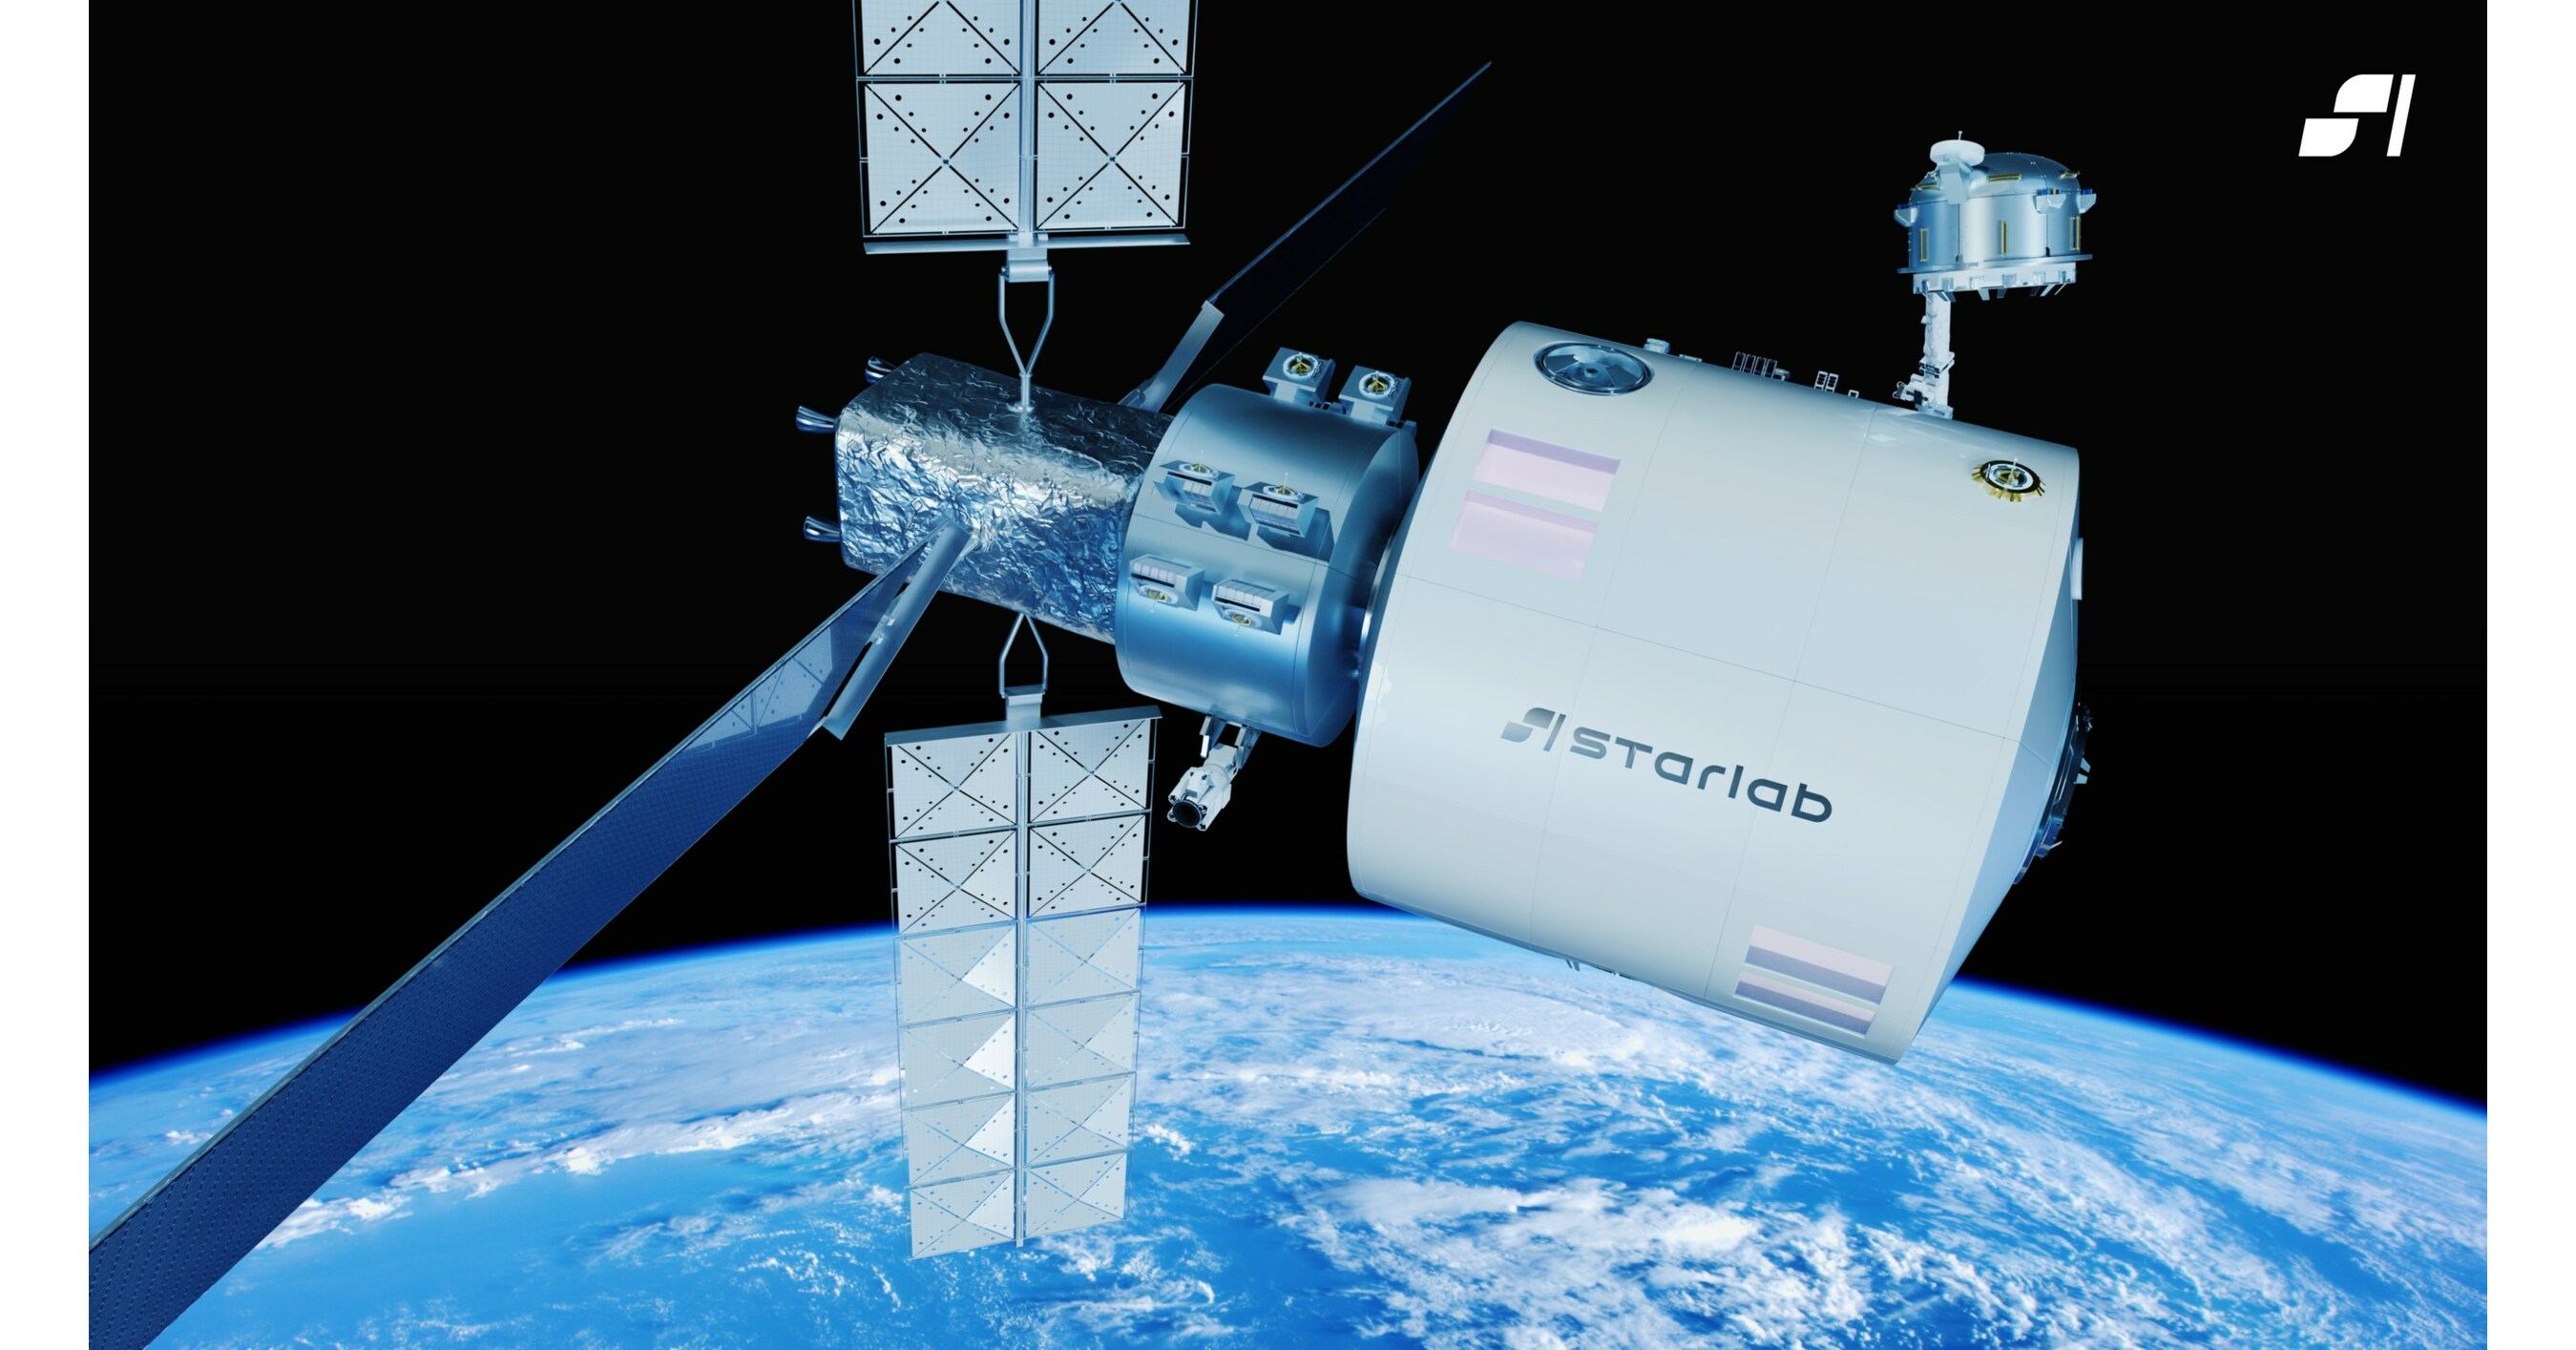 [Nanoracks,Voyager Space,Lockheed Martin, Airbus] Station spatiale privée starlab Voyager_Space_and_Airbus_Joint_Venture_Starlab